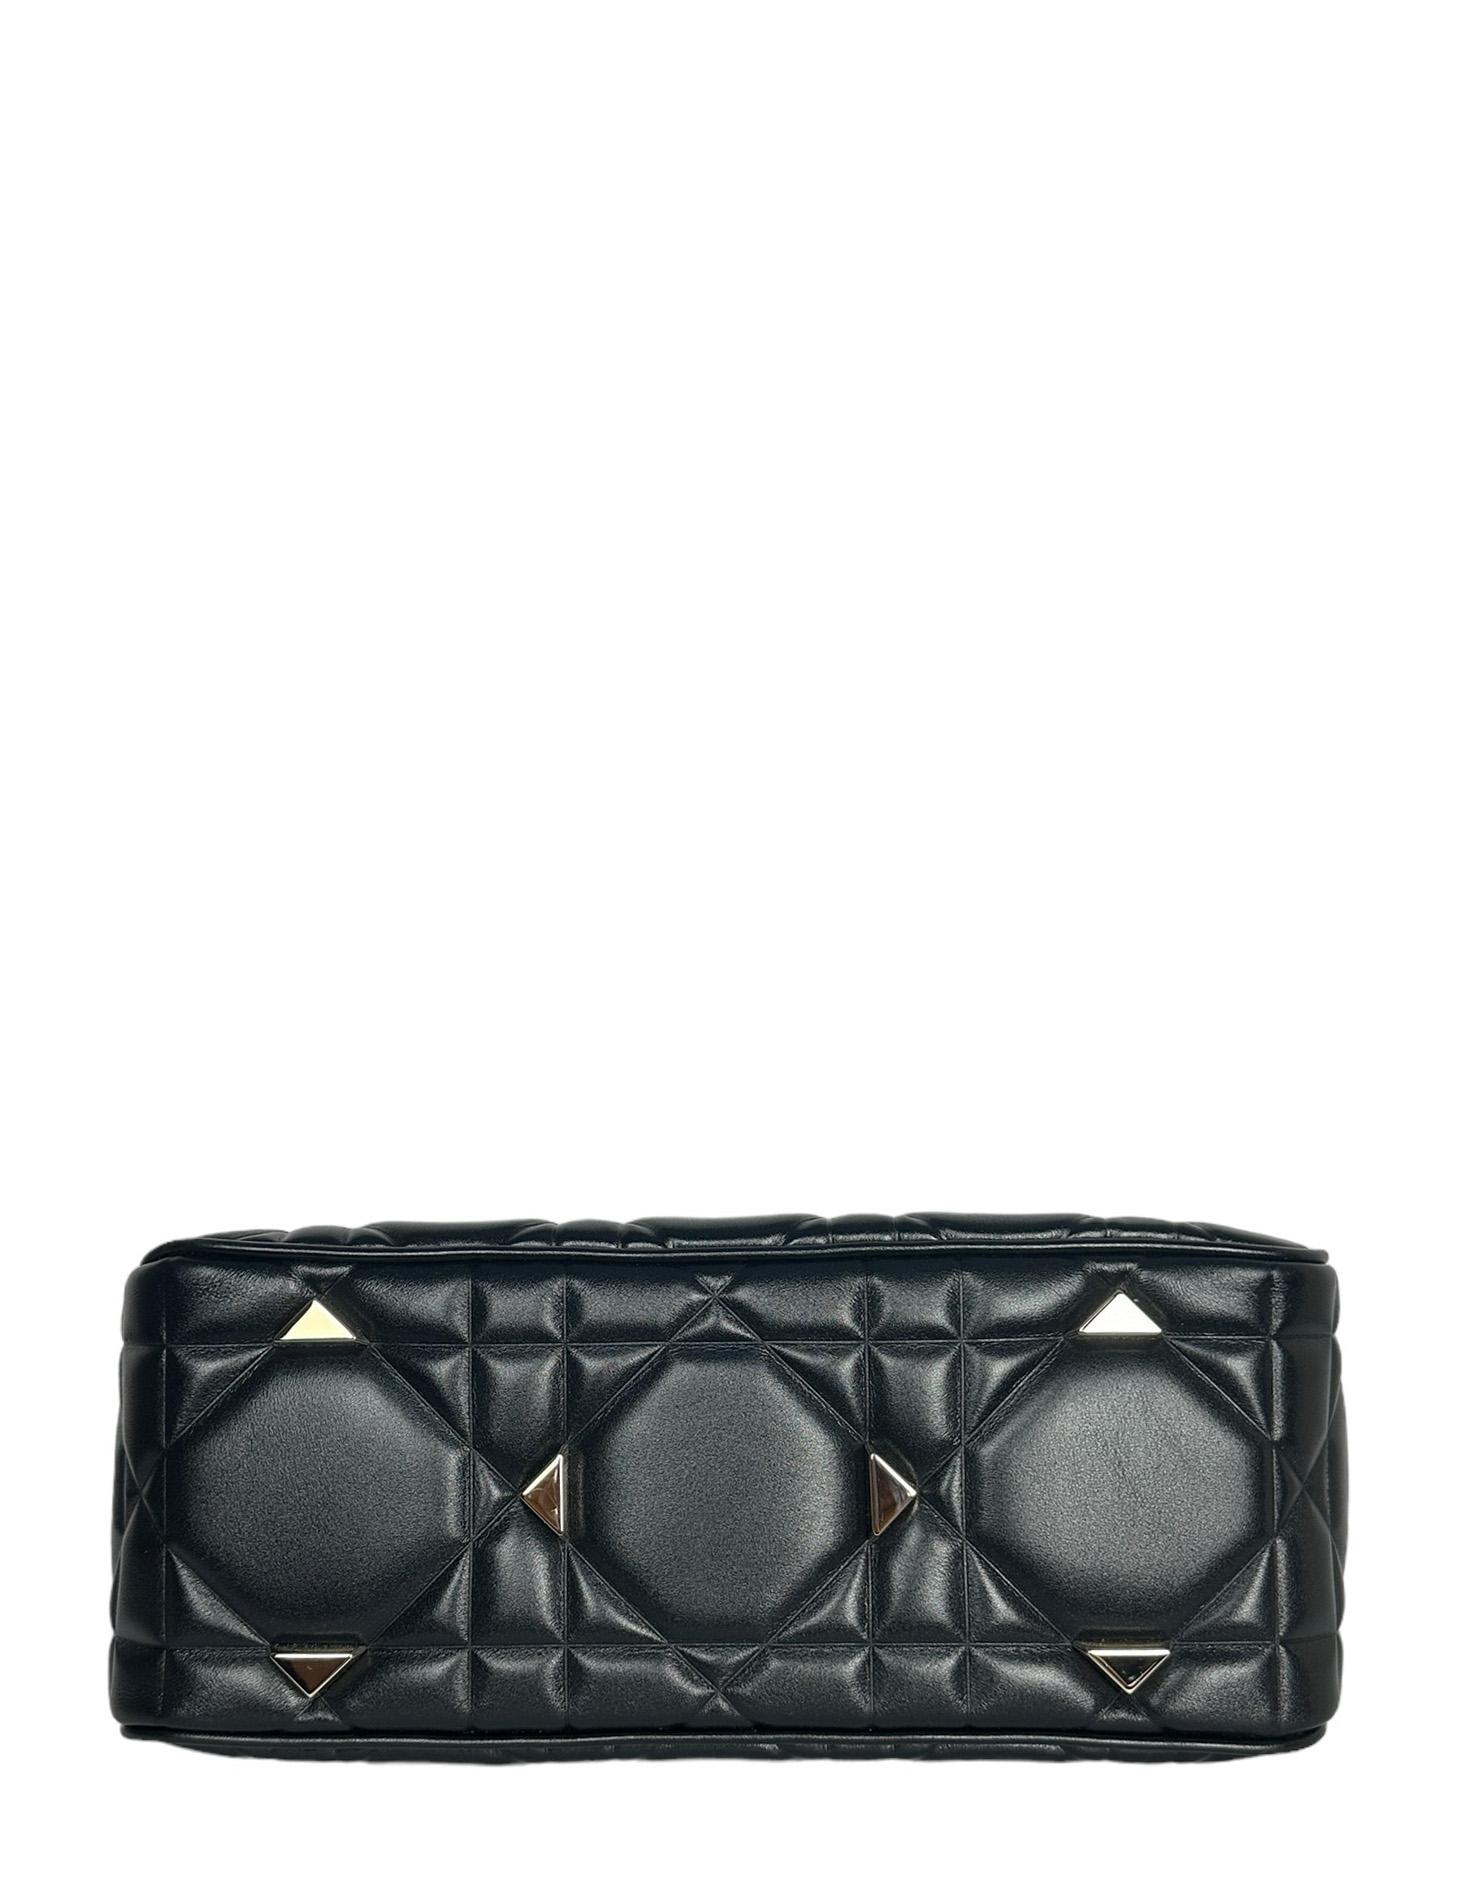 Christian Dior Black Leather Cannage Quilted The Lady 95.22 Bag rt. $7200 For Sale 2